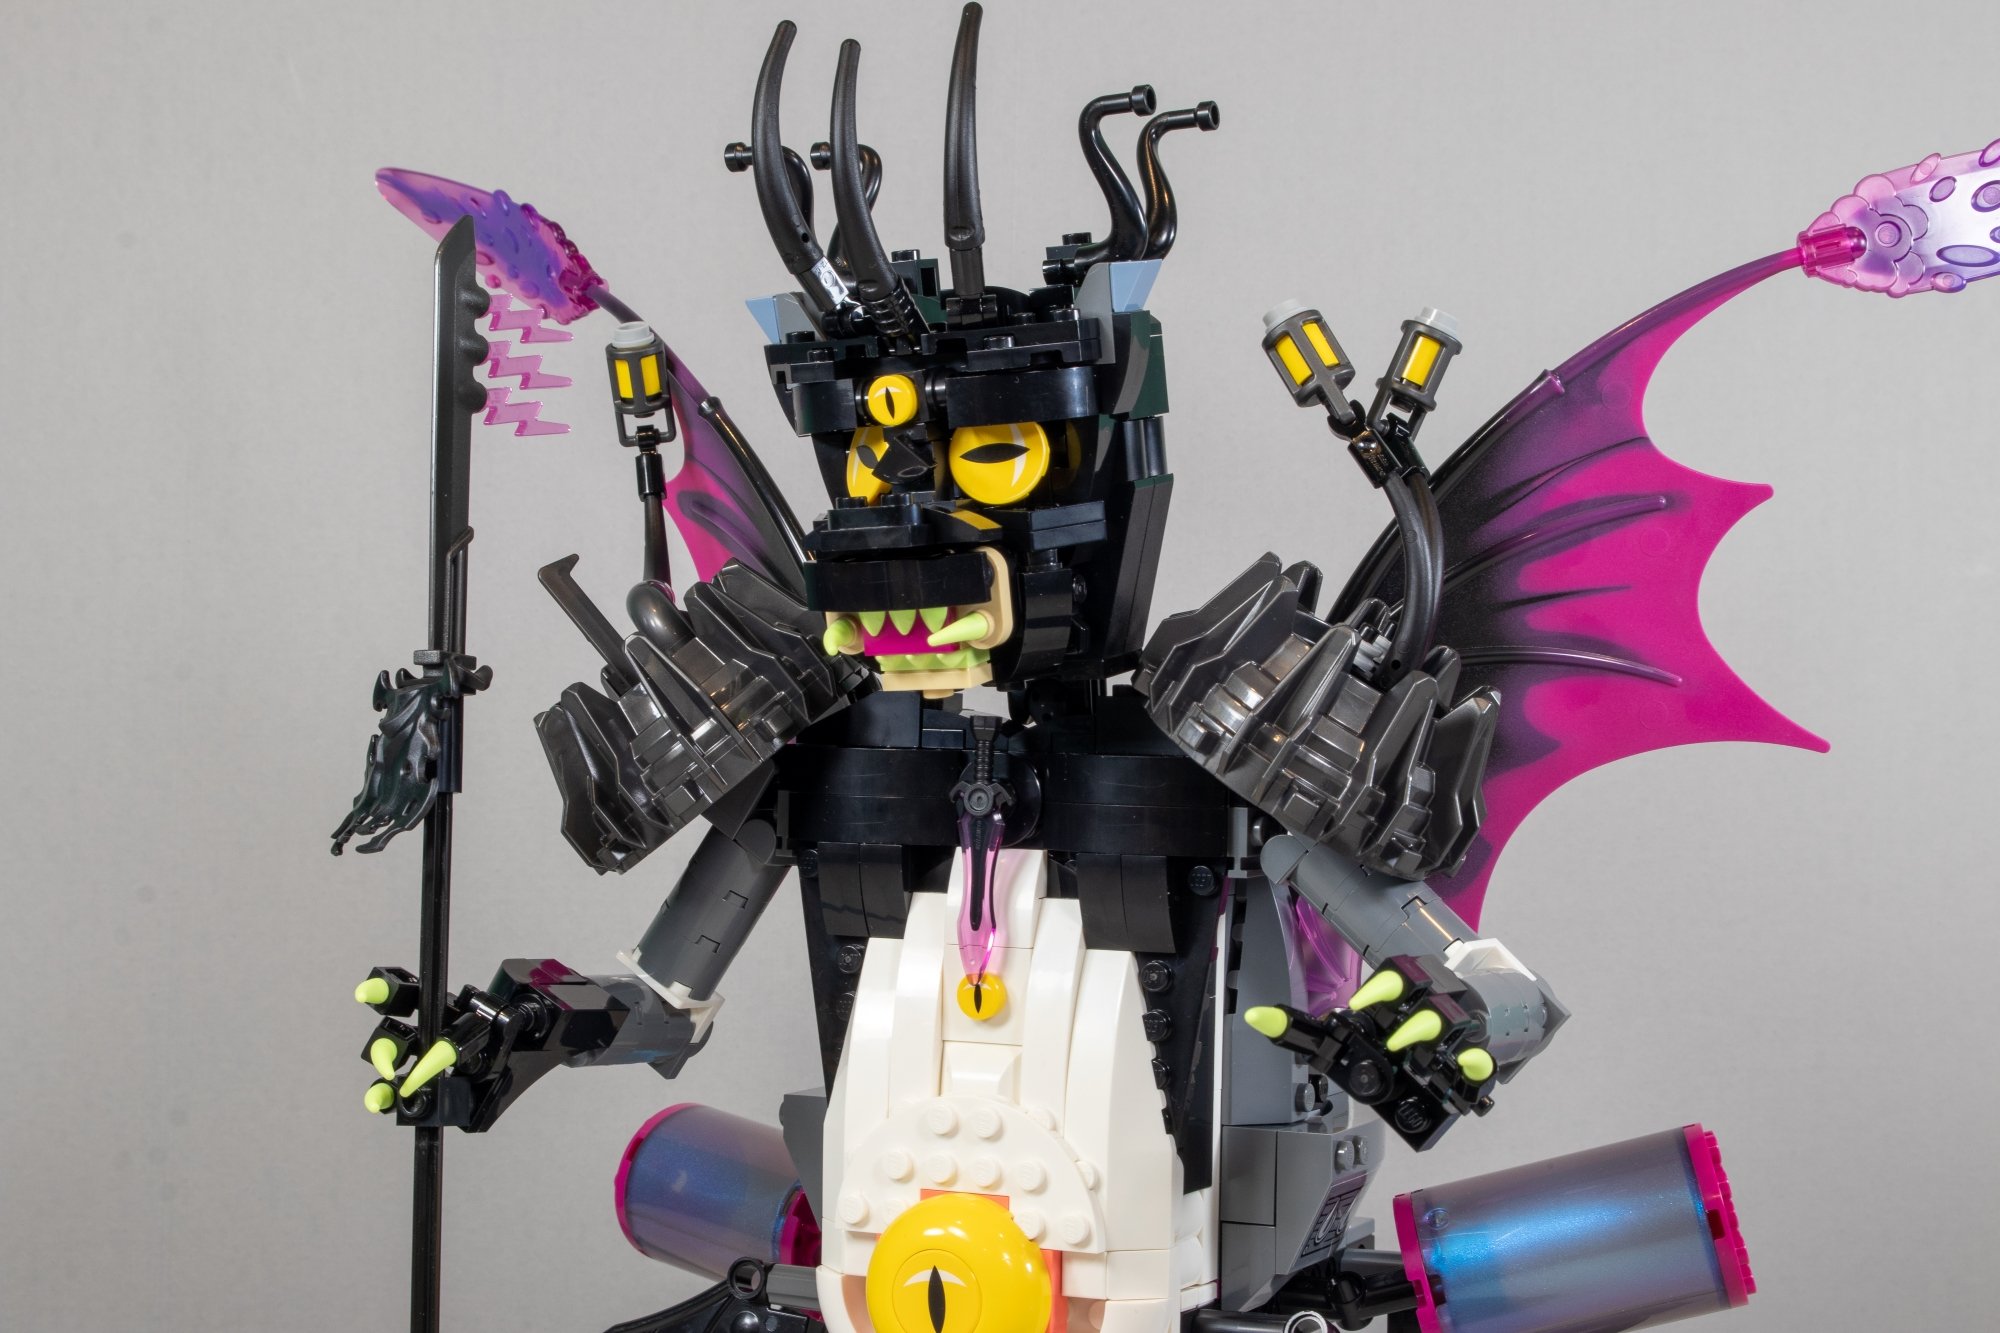 The Stuff of Nightmarezzz: Exploring the Darker Side of LEGO Dreamzzz -  BrickNerd - All things LEGO and the LEGO fan community